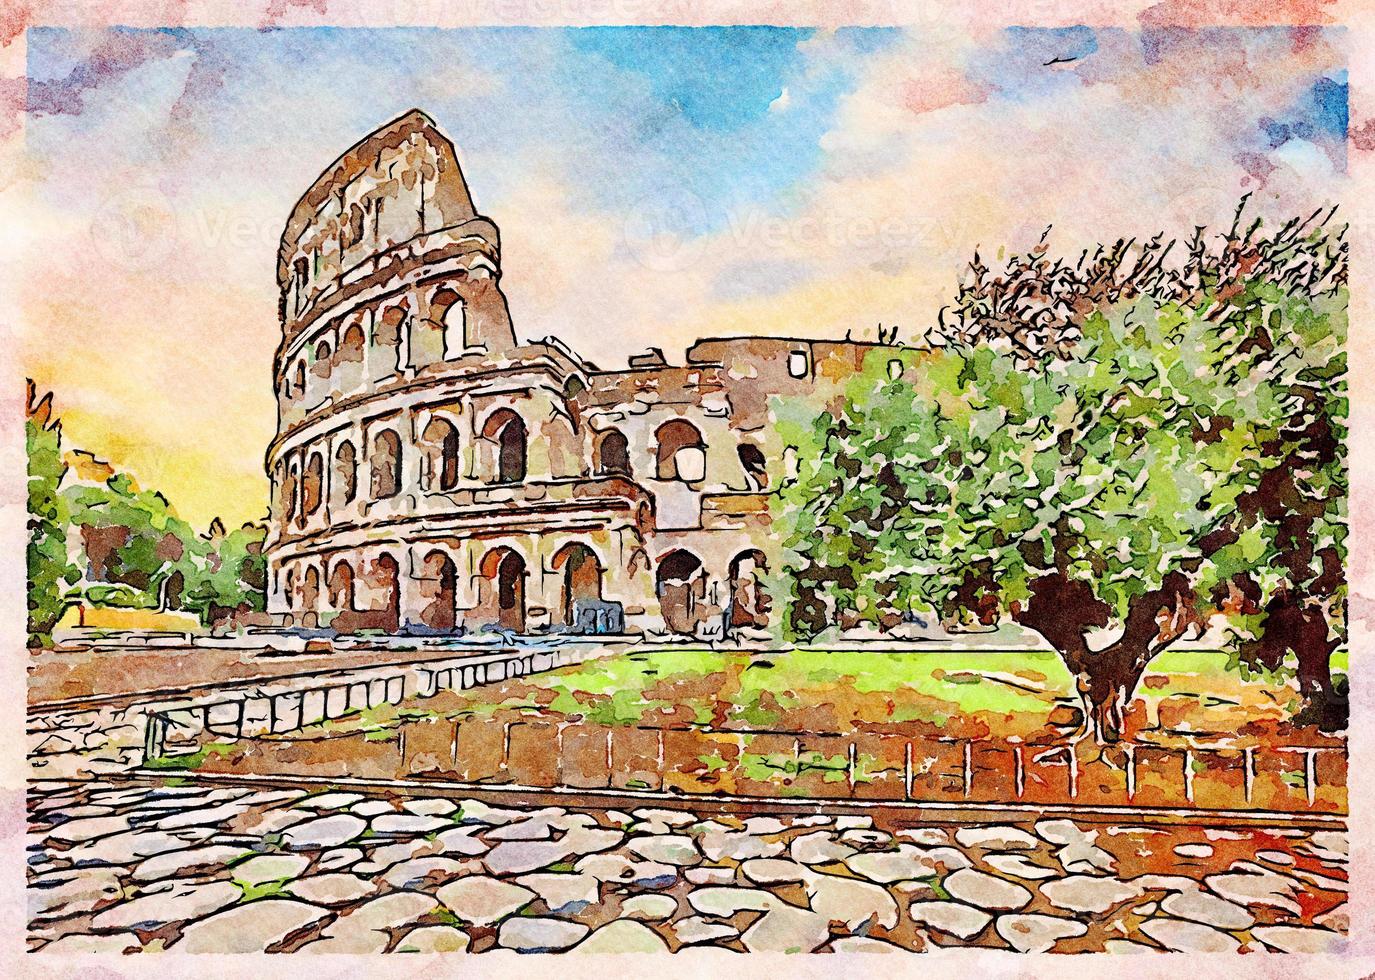 Rome, Italy - Sunset behind the Colosseum - Creative illustration, vintage watercolor design. photo